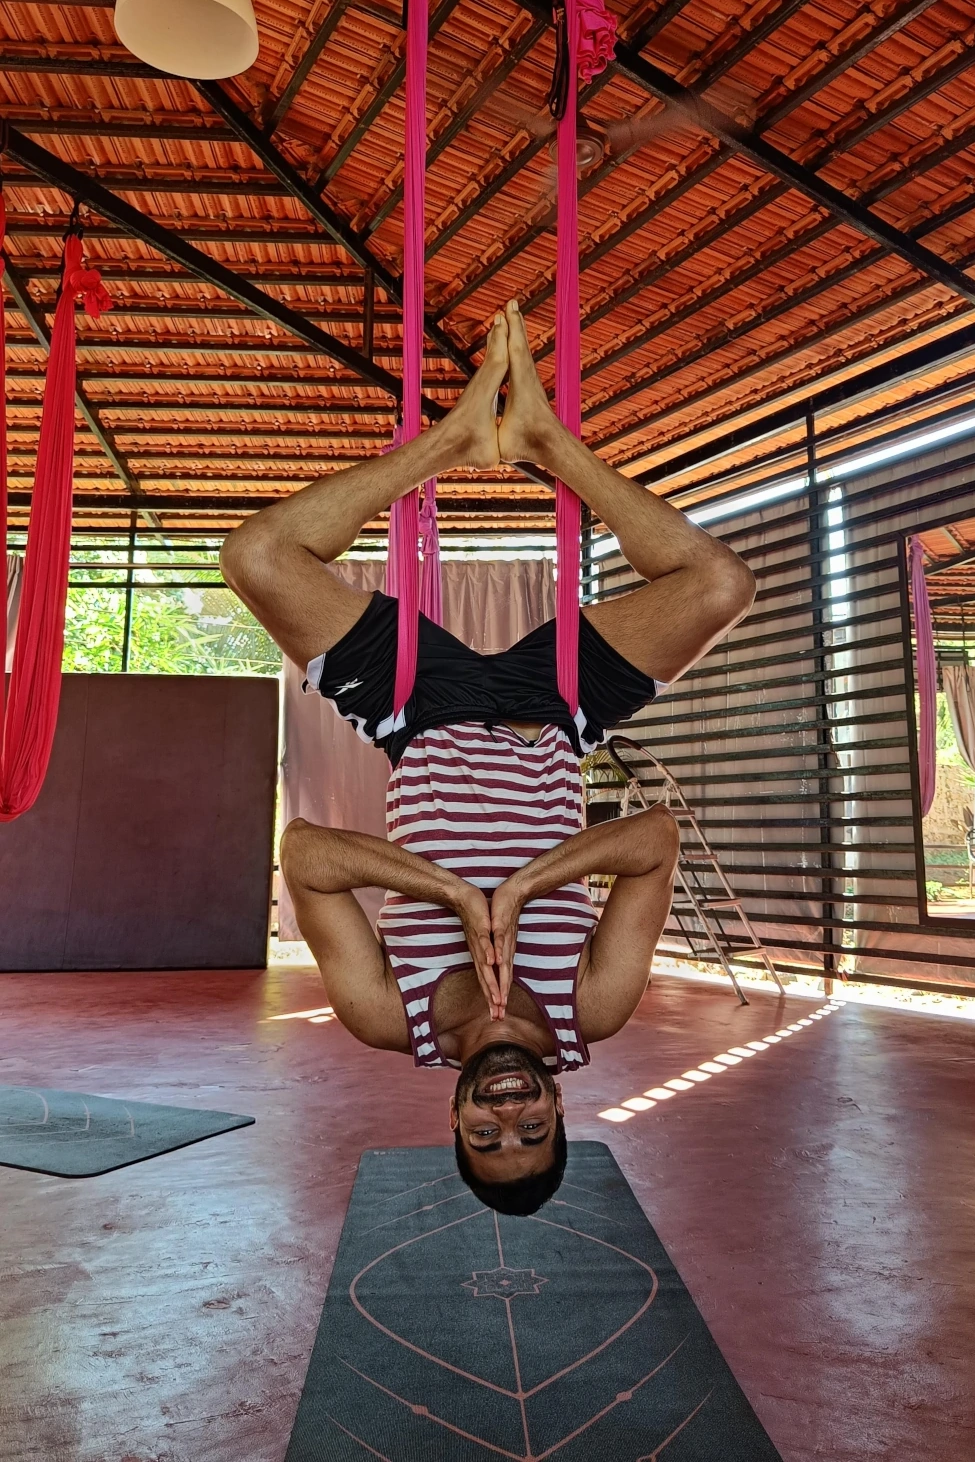 Aerial Yoga: What is it, Benefits and Can you do it at home? | HealthShots